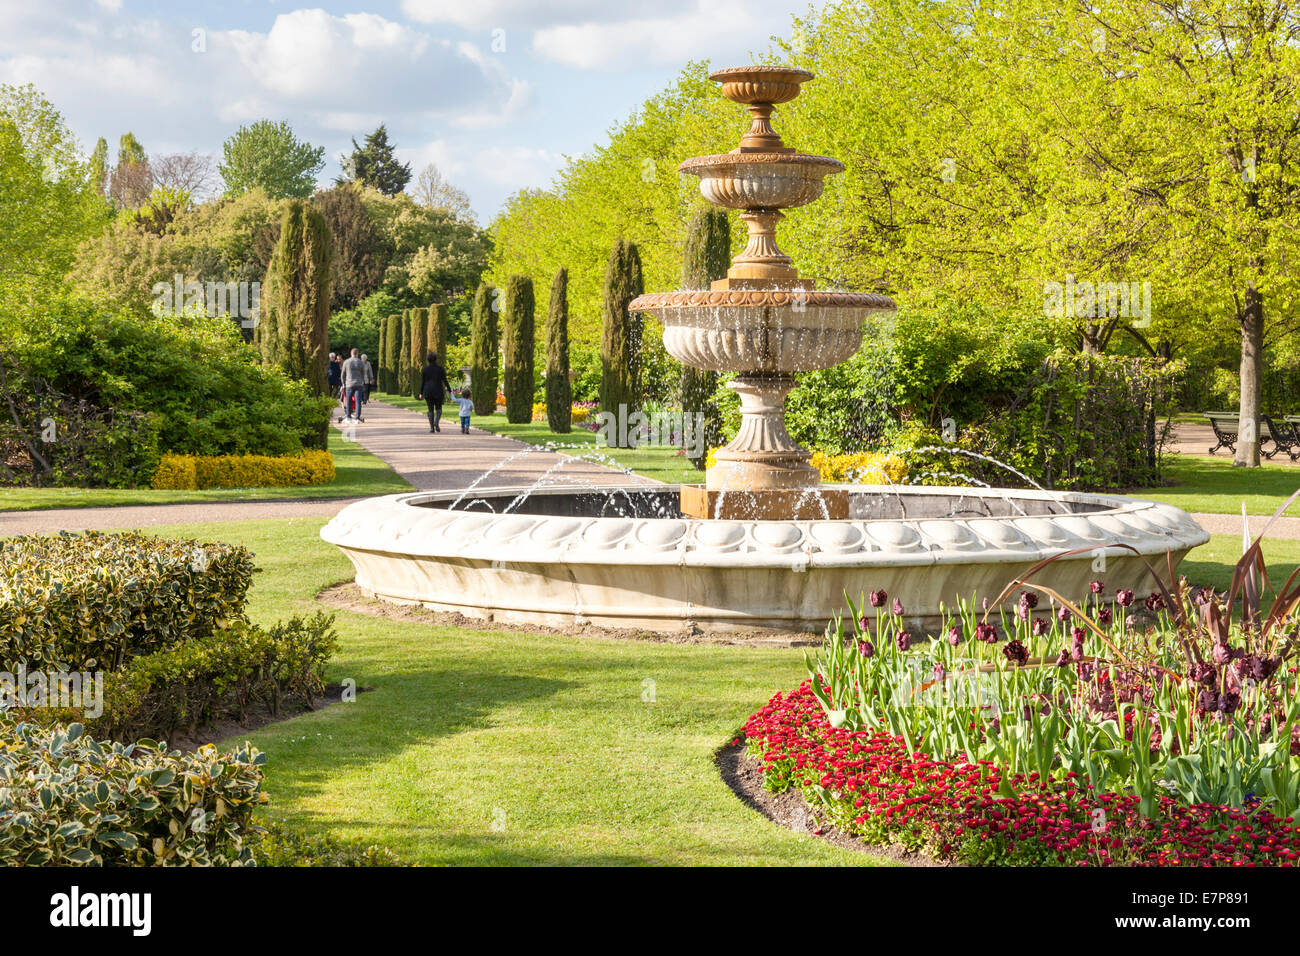 Fountain, trees and flowers in Avenue Gardens at Regents Park, London, England, UK Stock Photo